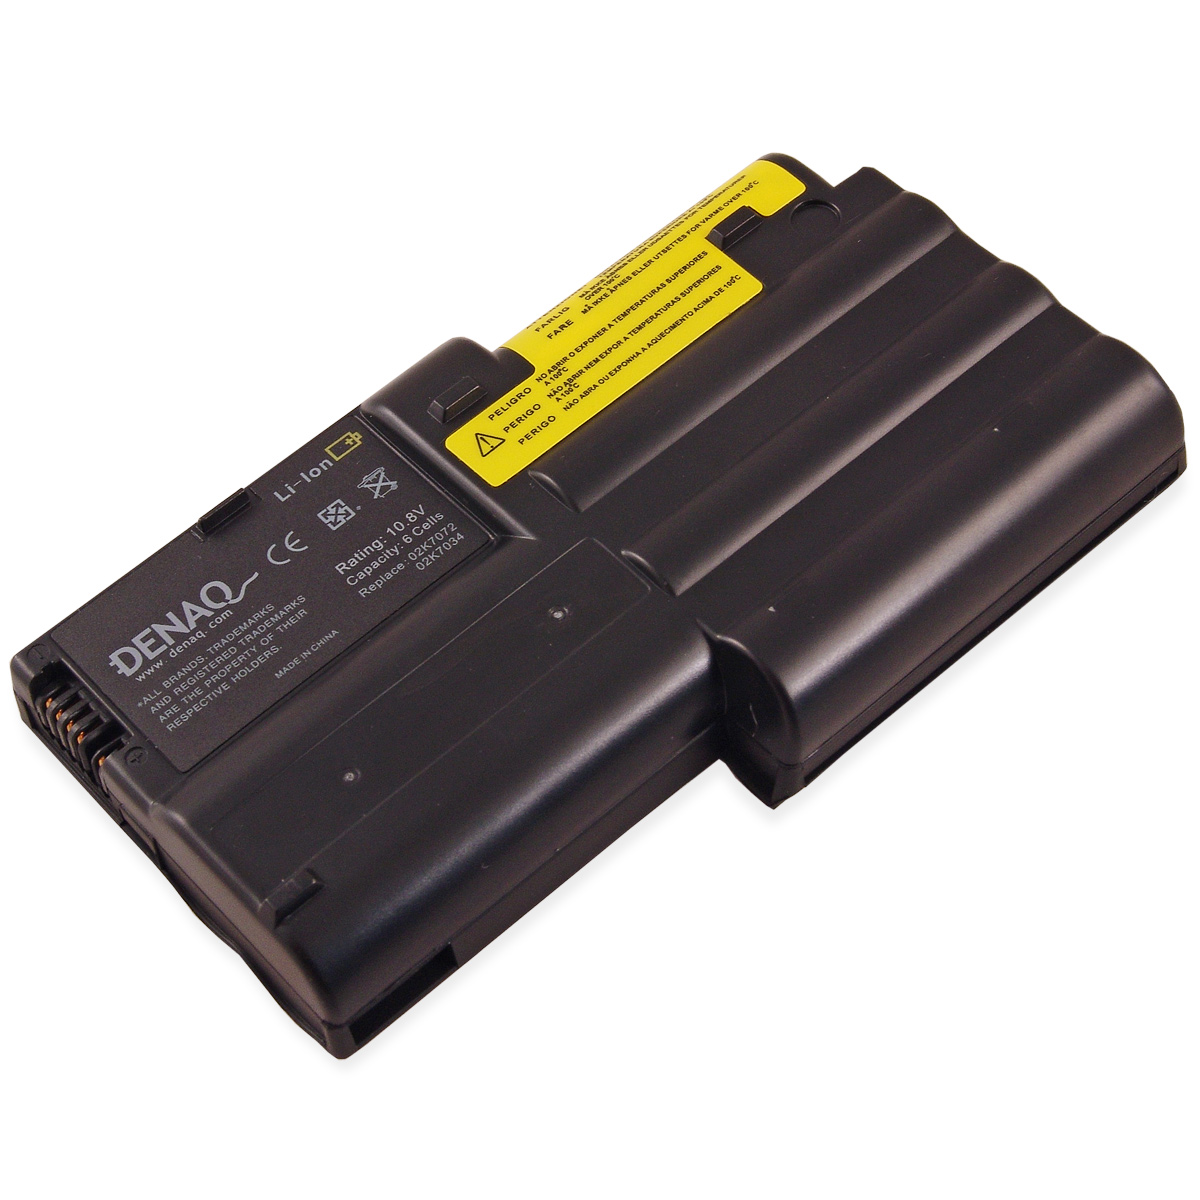 0814352010132 - 6-CELL 58WHR LI-ION LAPTOP BATTERY FOR IBM THINKPAD T30